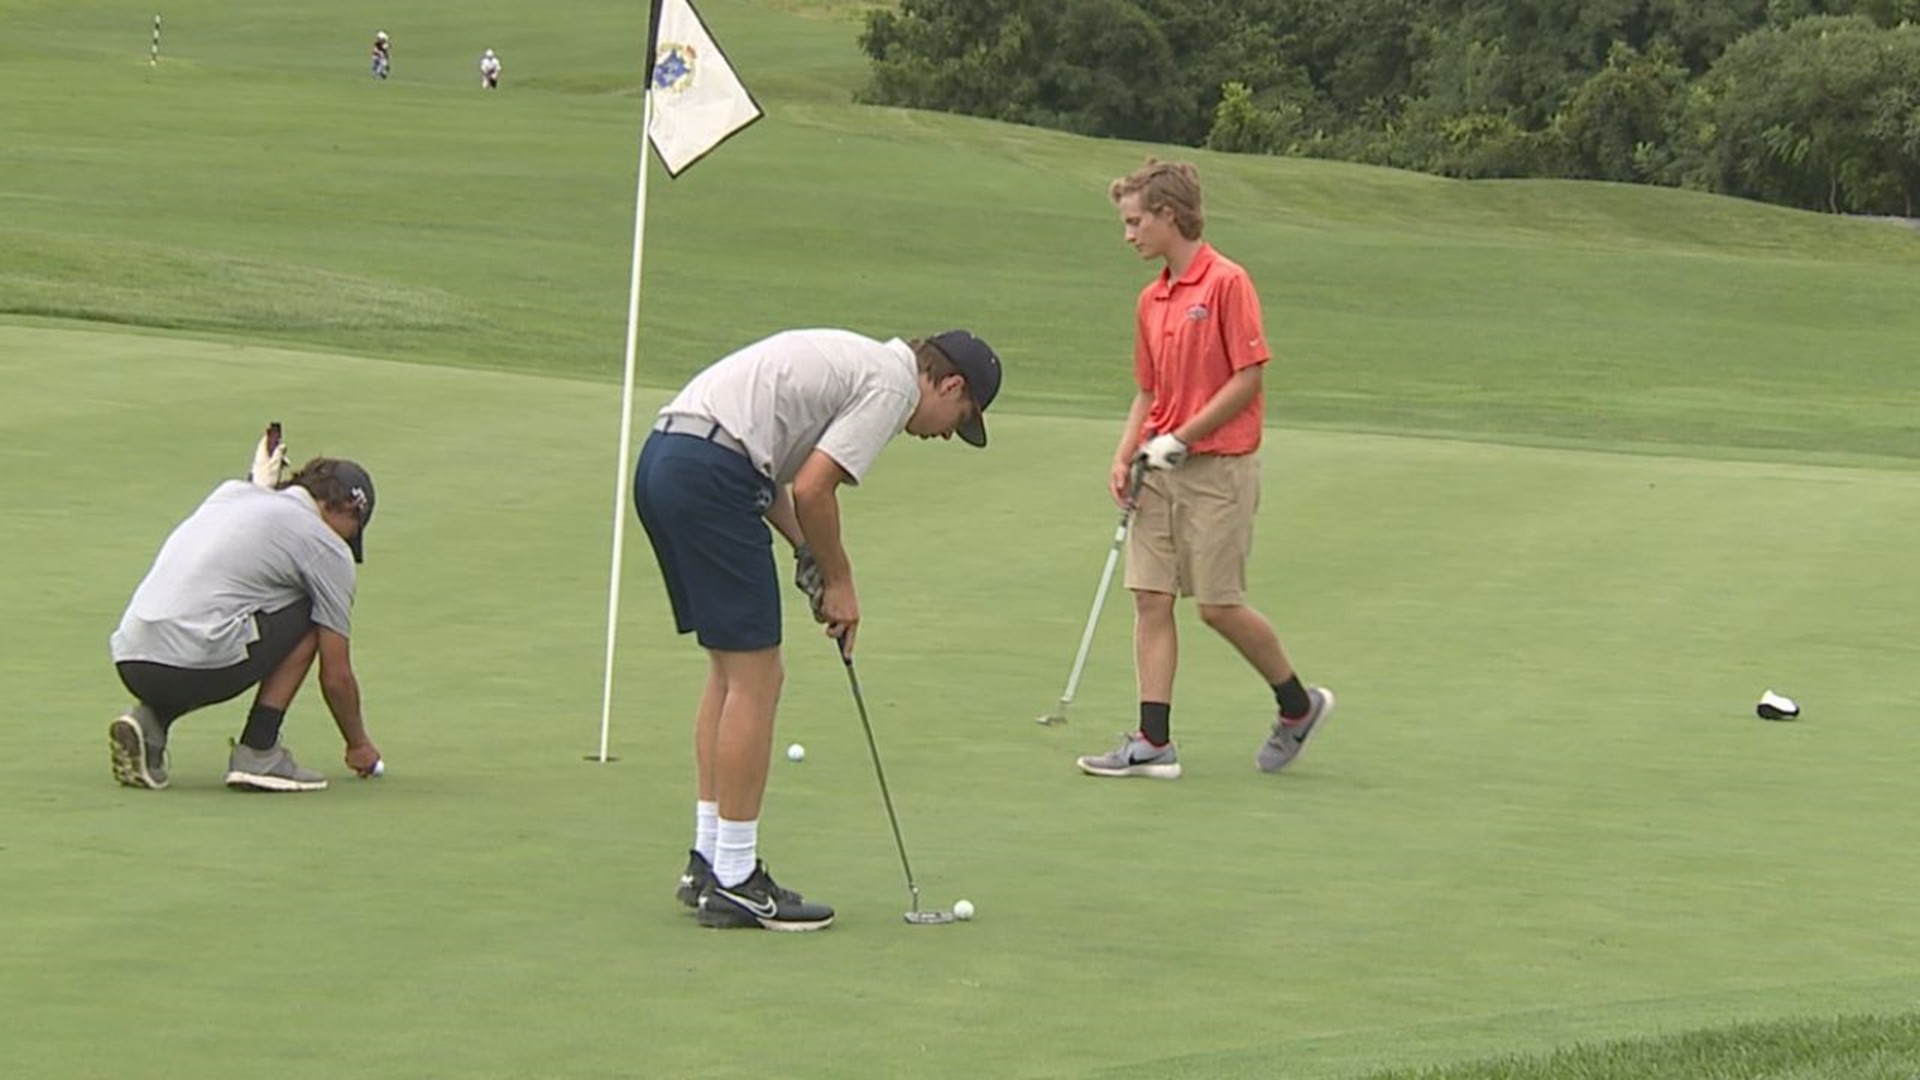 Dallastown picks up their first win of the season at Royal Manchester.